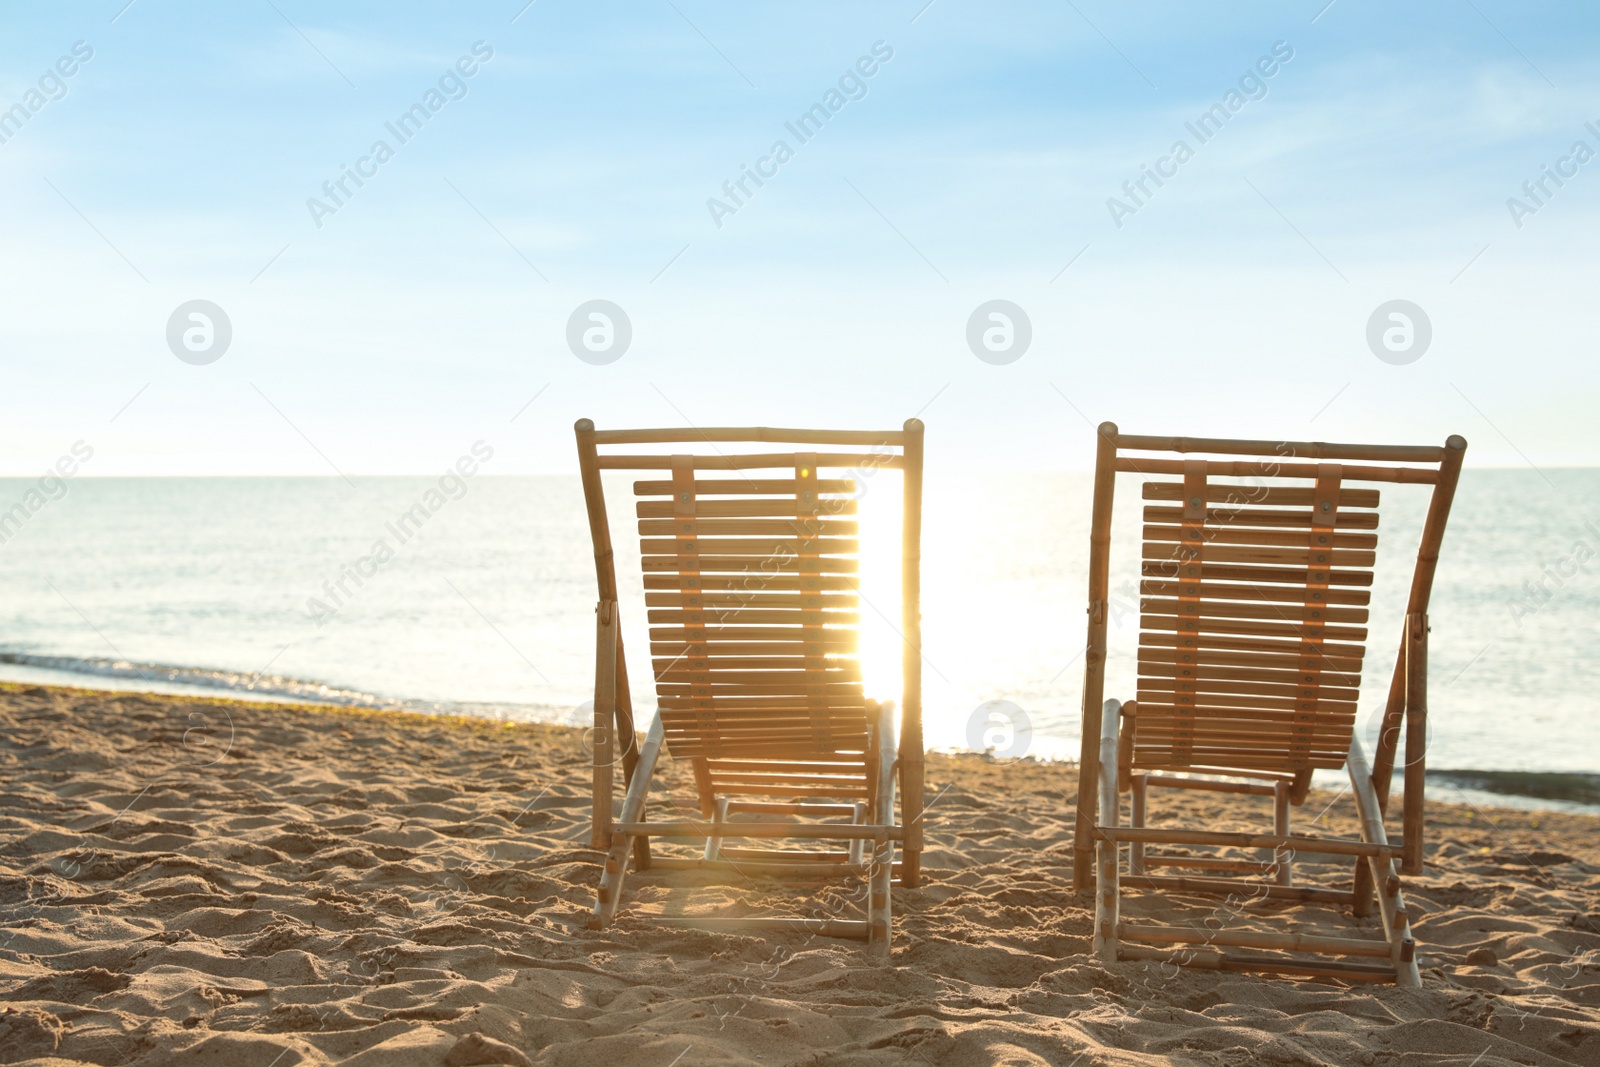 Photo of Wooden deck chairs on sandy beach. Summer vacation